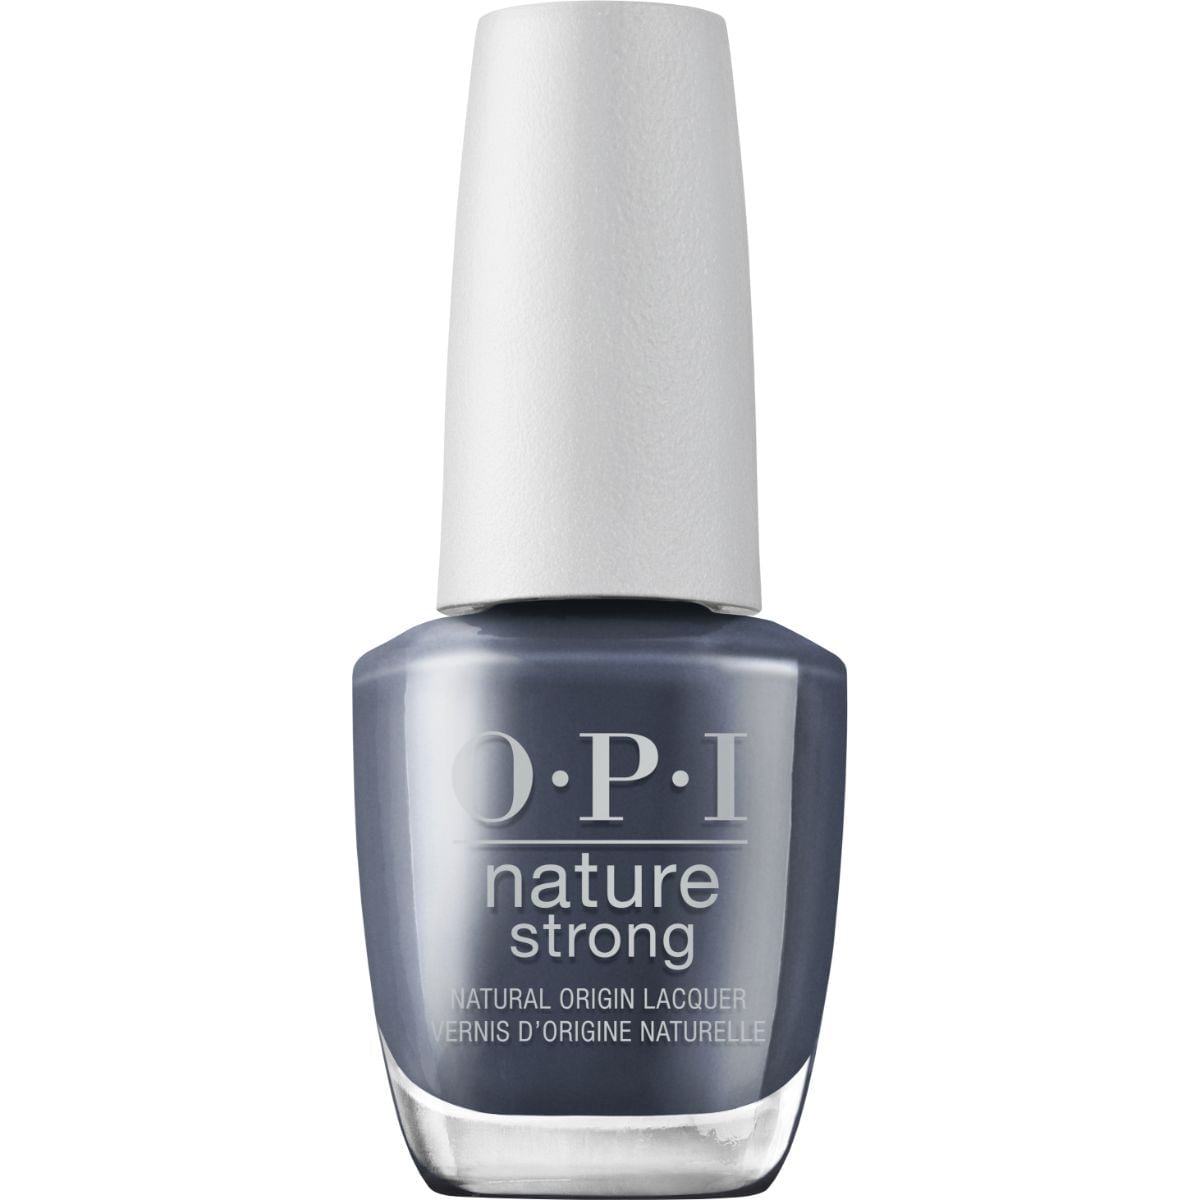 Exploring OPI: A Comprehensive Overview of the Iconic Brand